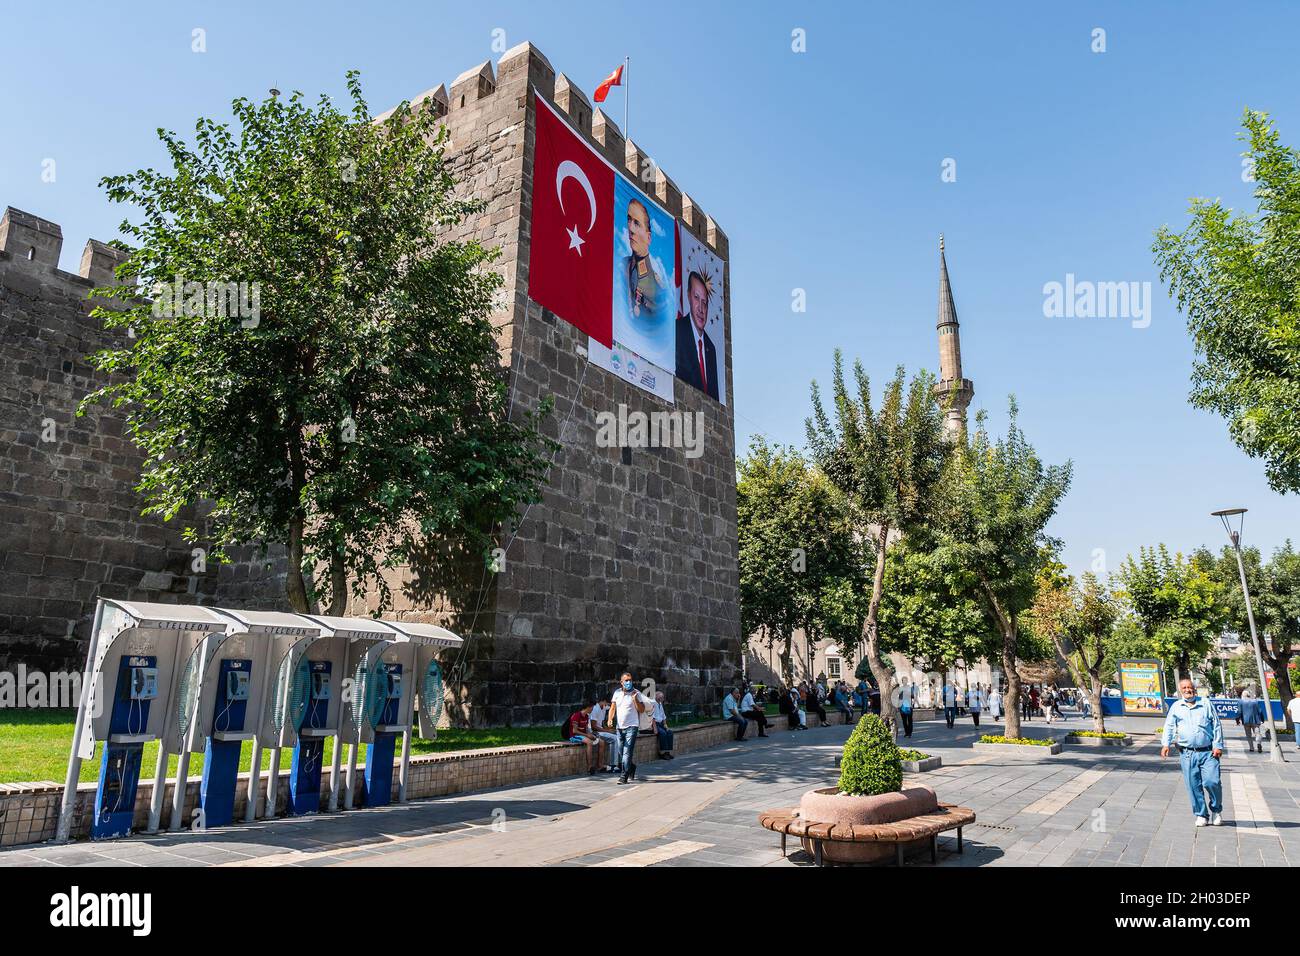 Kayseri Castle Kalesi Breathtaking Picturesque View from the Street on a Blue Sky Day in Summer Stock Photo